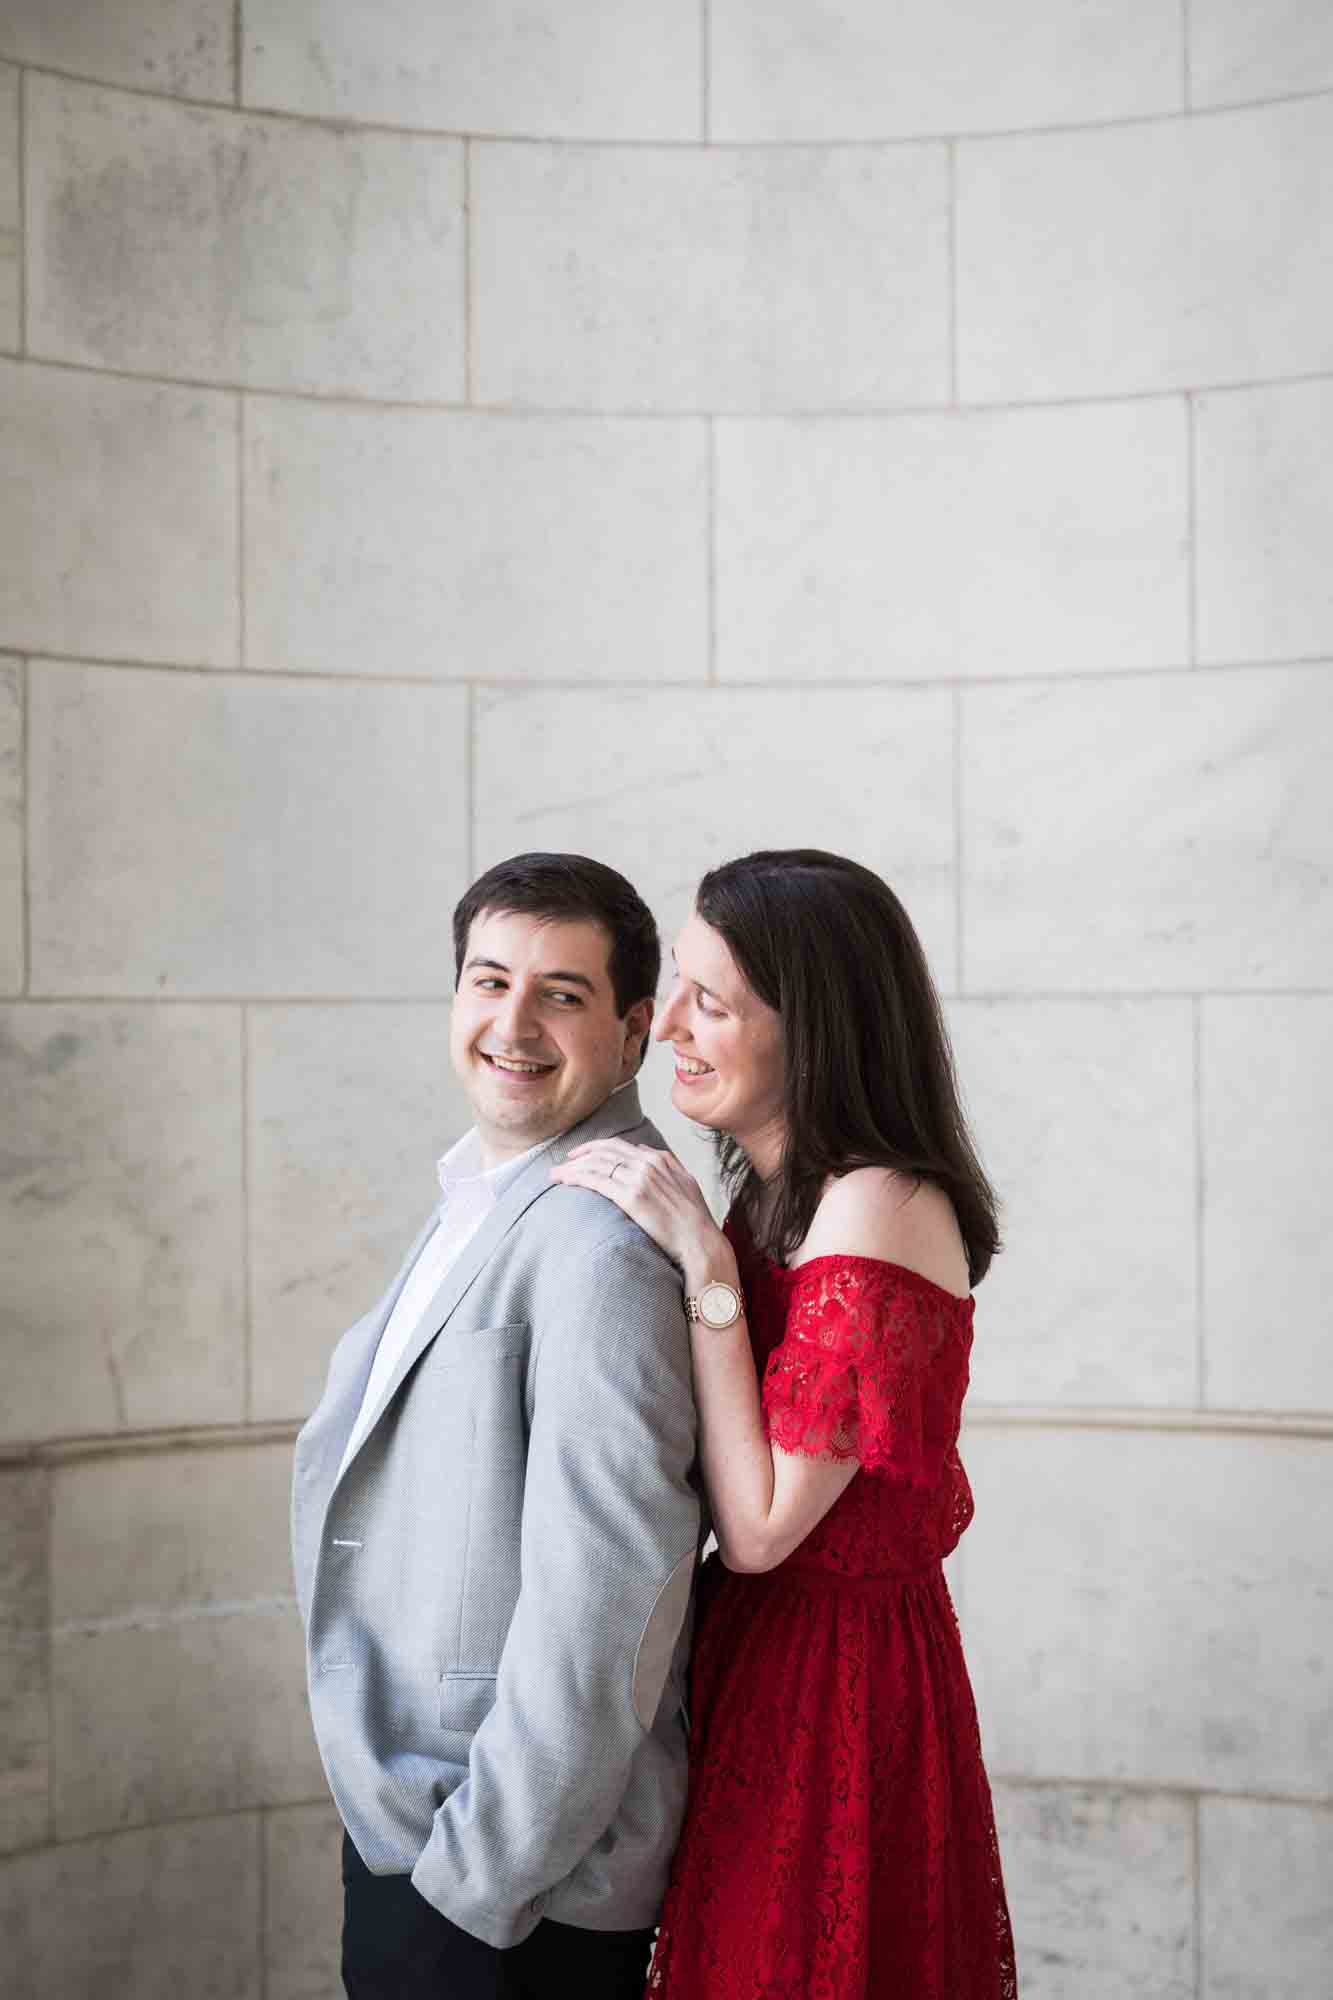 Man hugging in marble alcove with woman wearing red dress during a New York Public Library surprise proposal